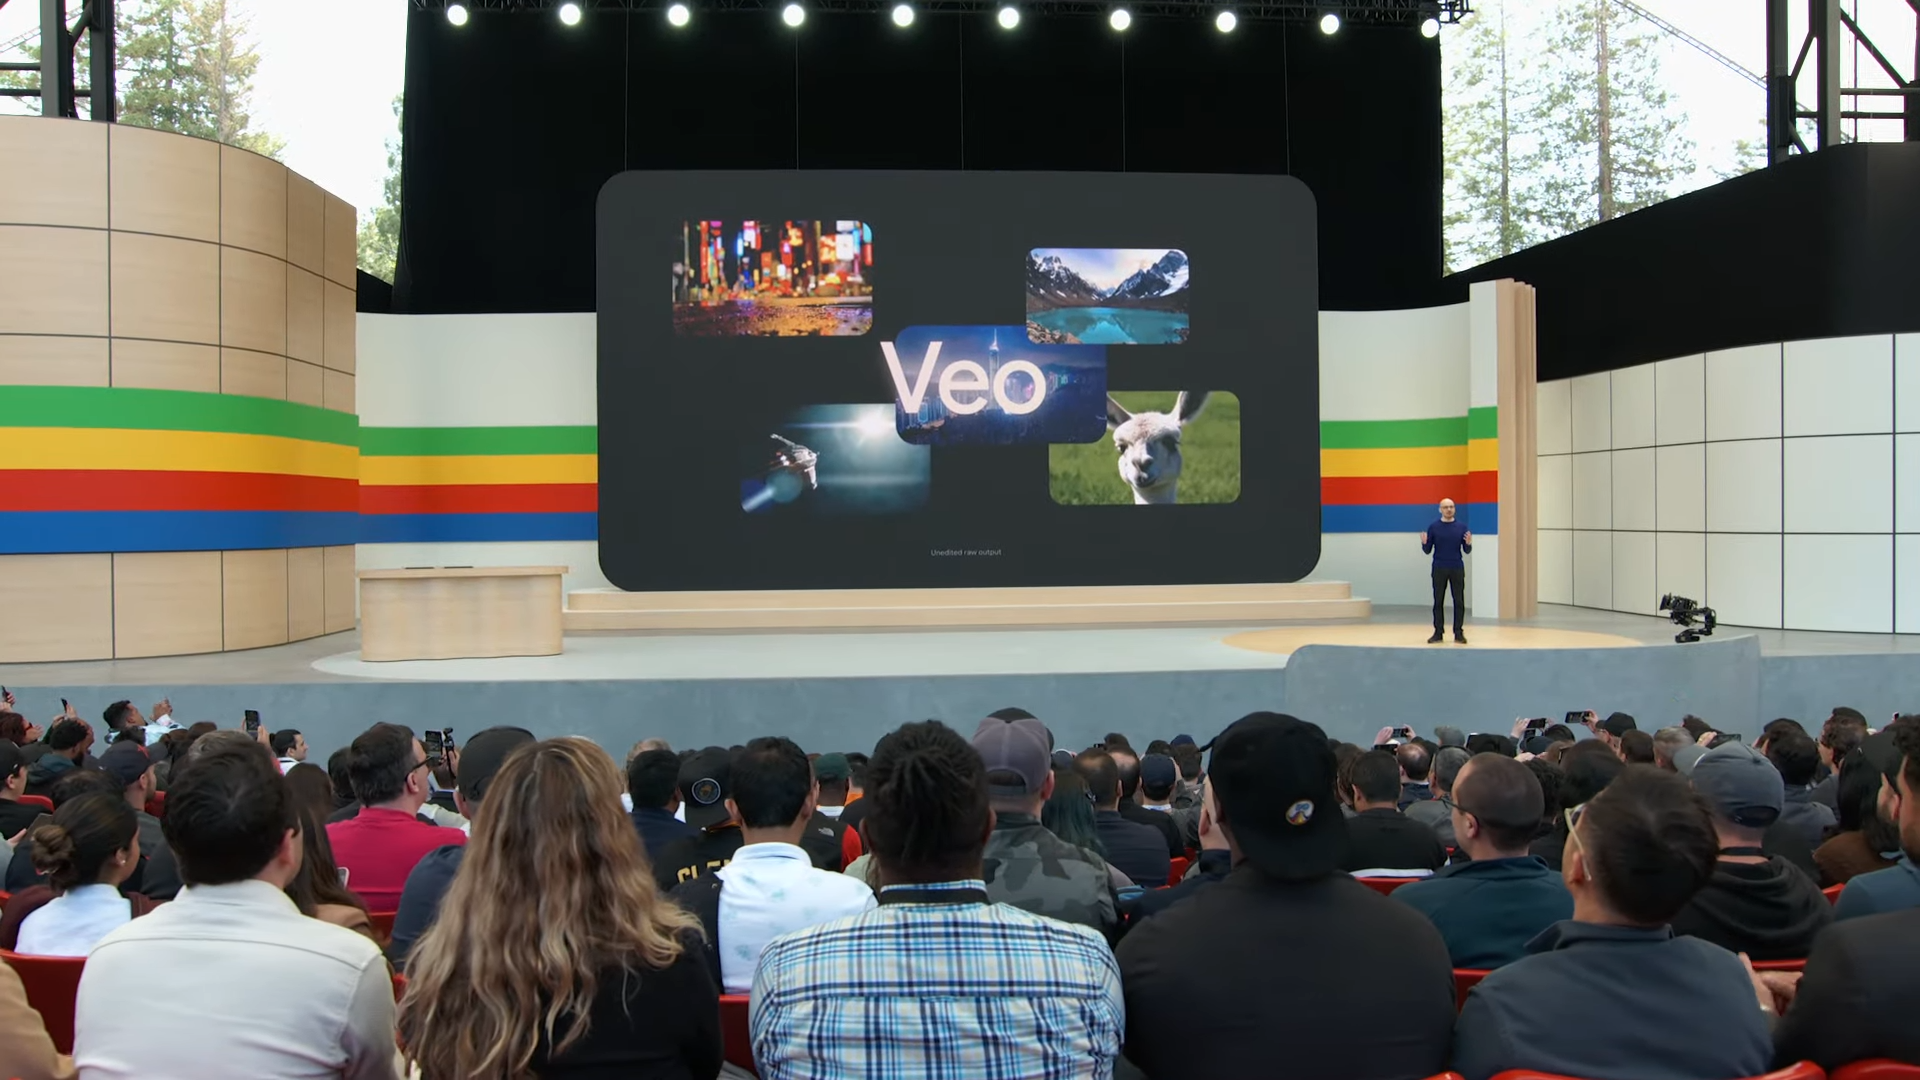 How to join the waitlist for Google’s Veo AI video tool